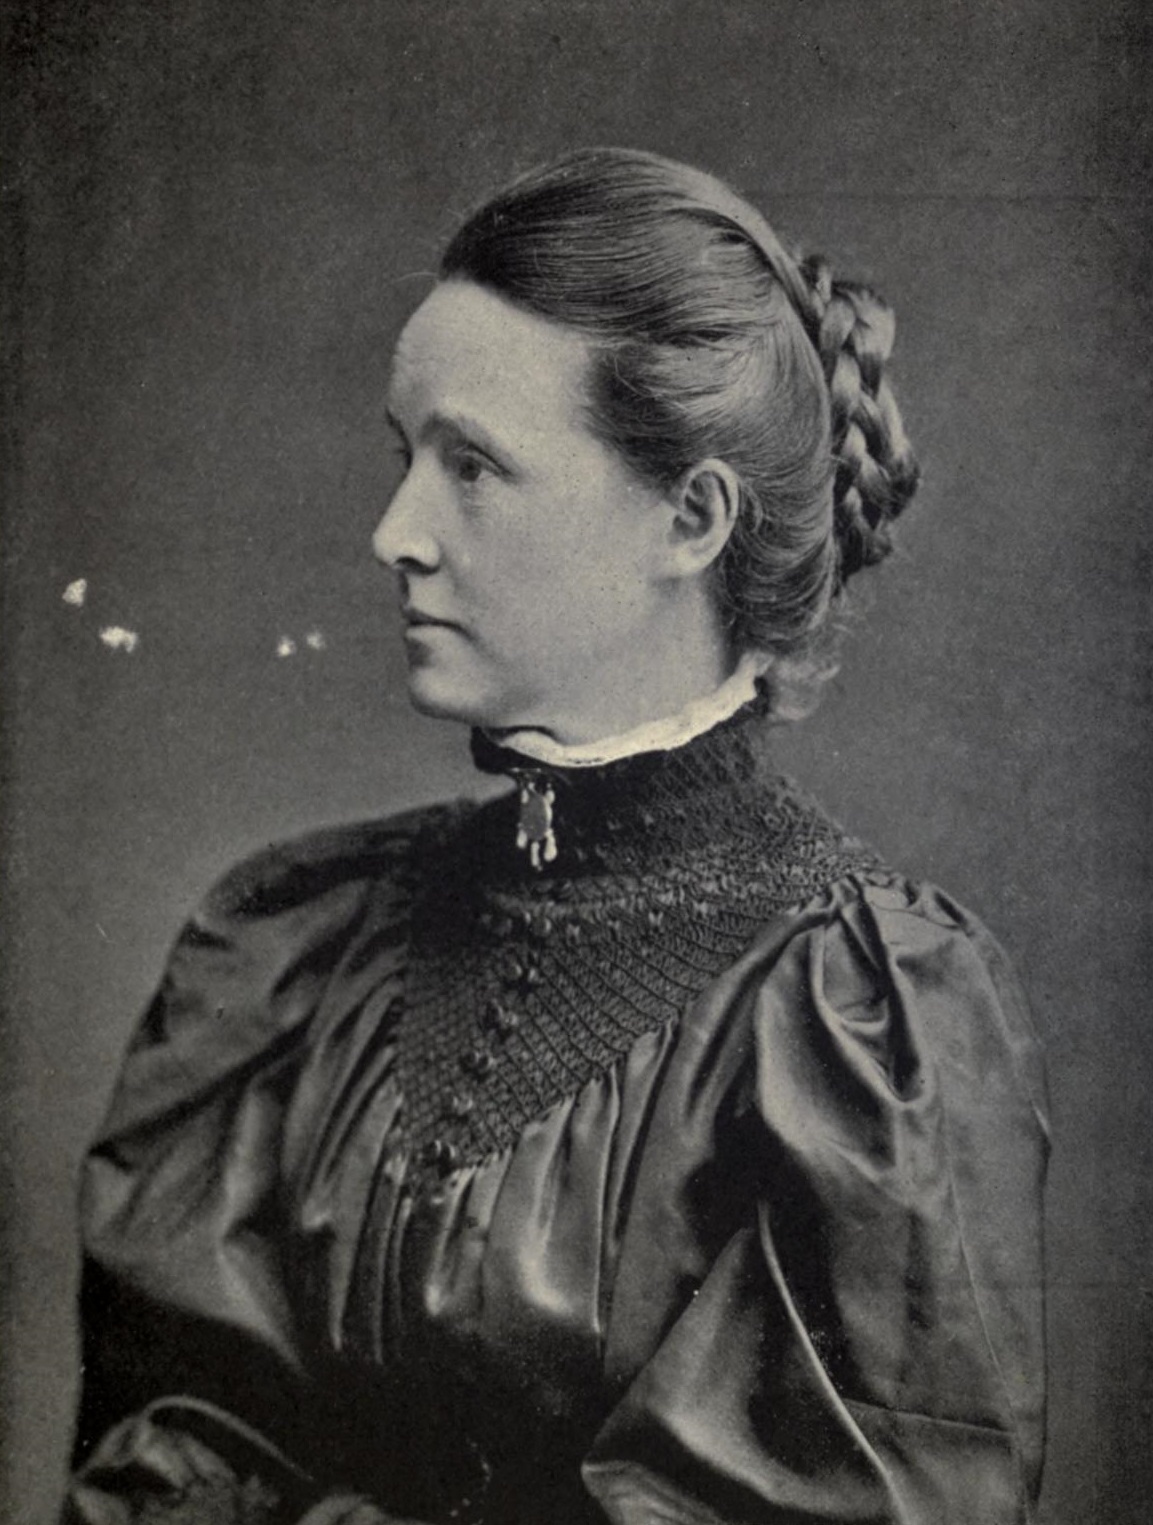 Black and white photo of Millicent Fawcett with hair up in a plaited coil on the back of her head, wearing high collared Edwardian dress. Photo taken approx 1897.